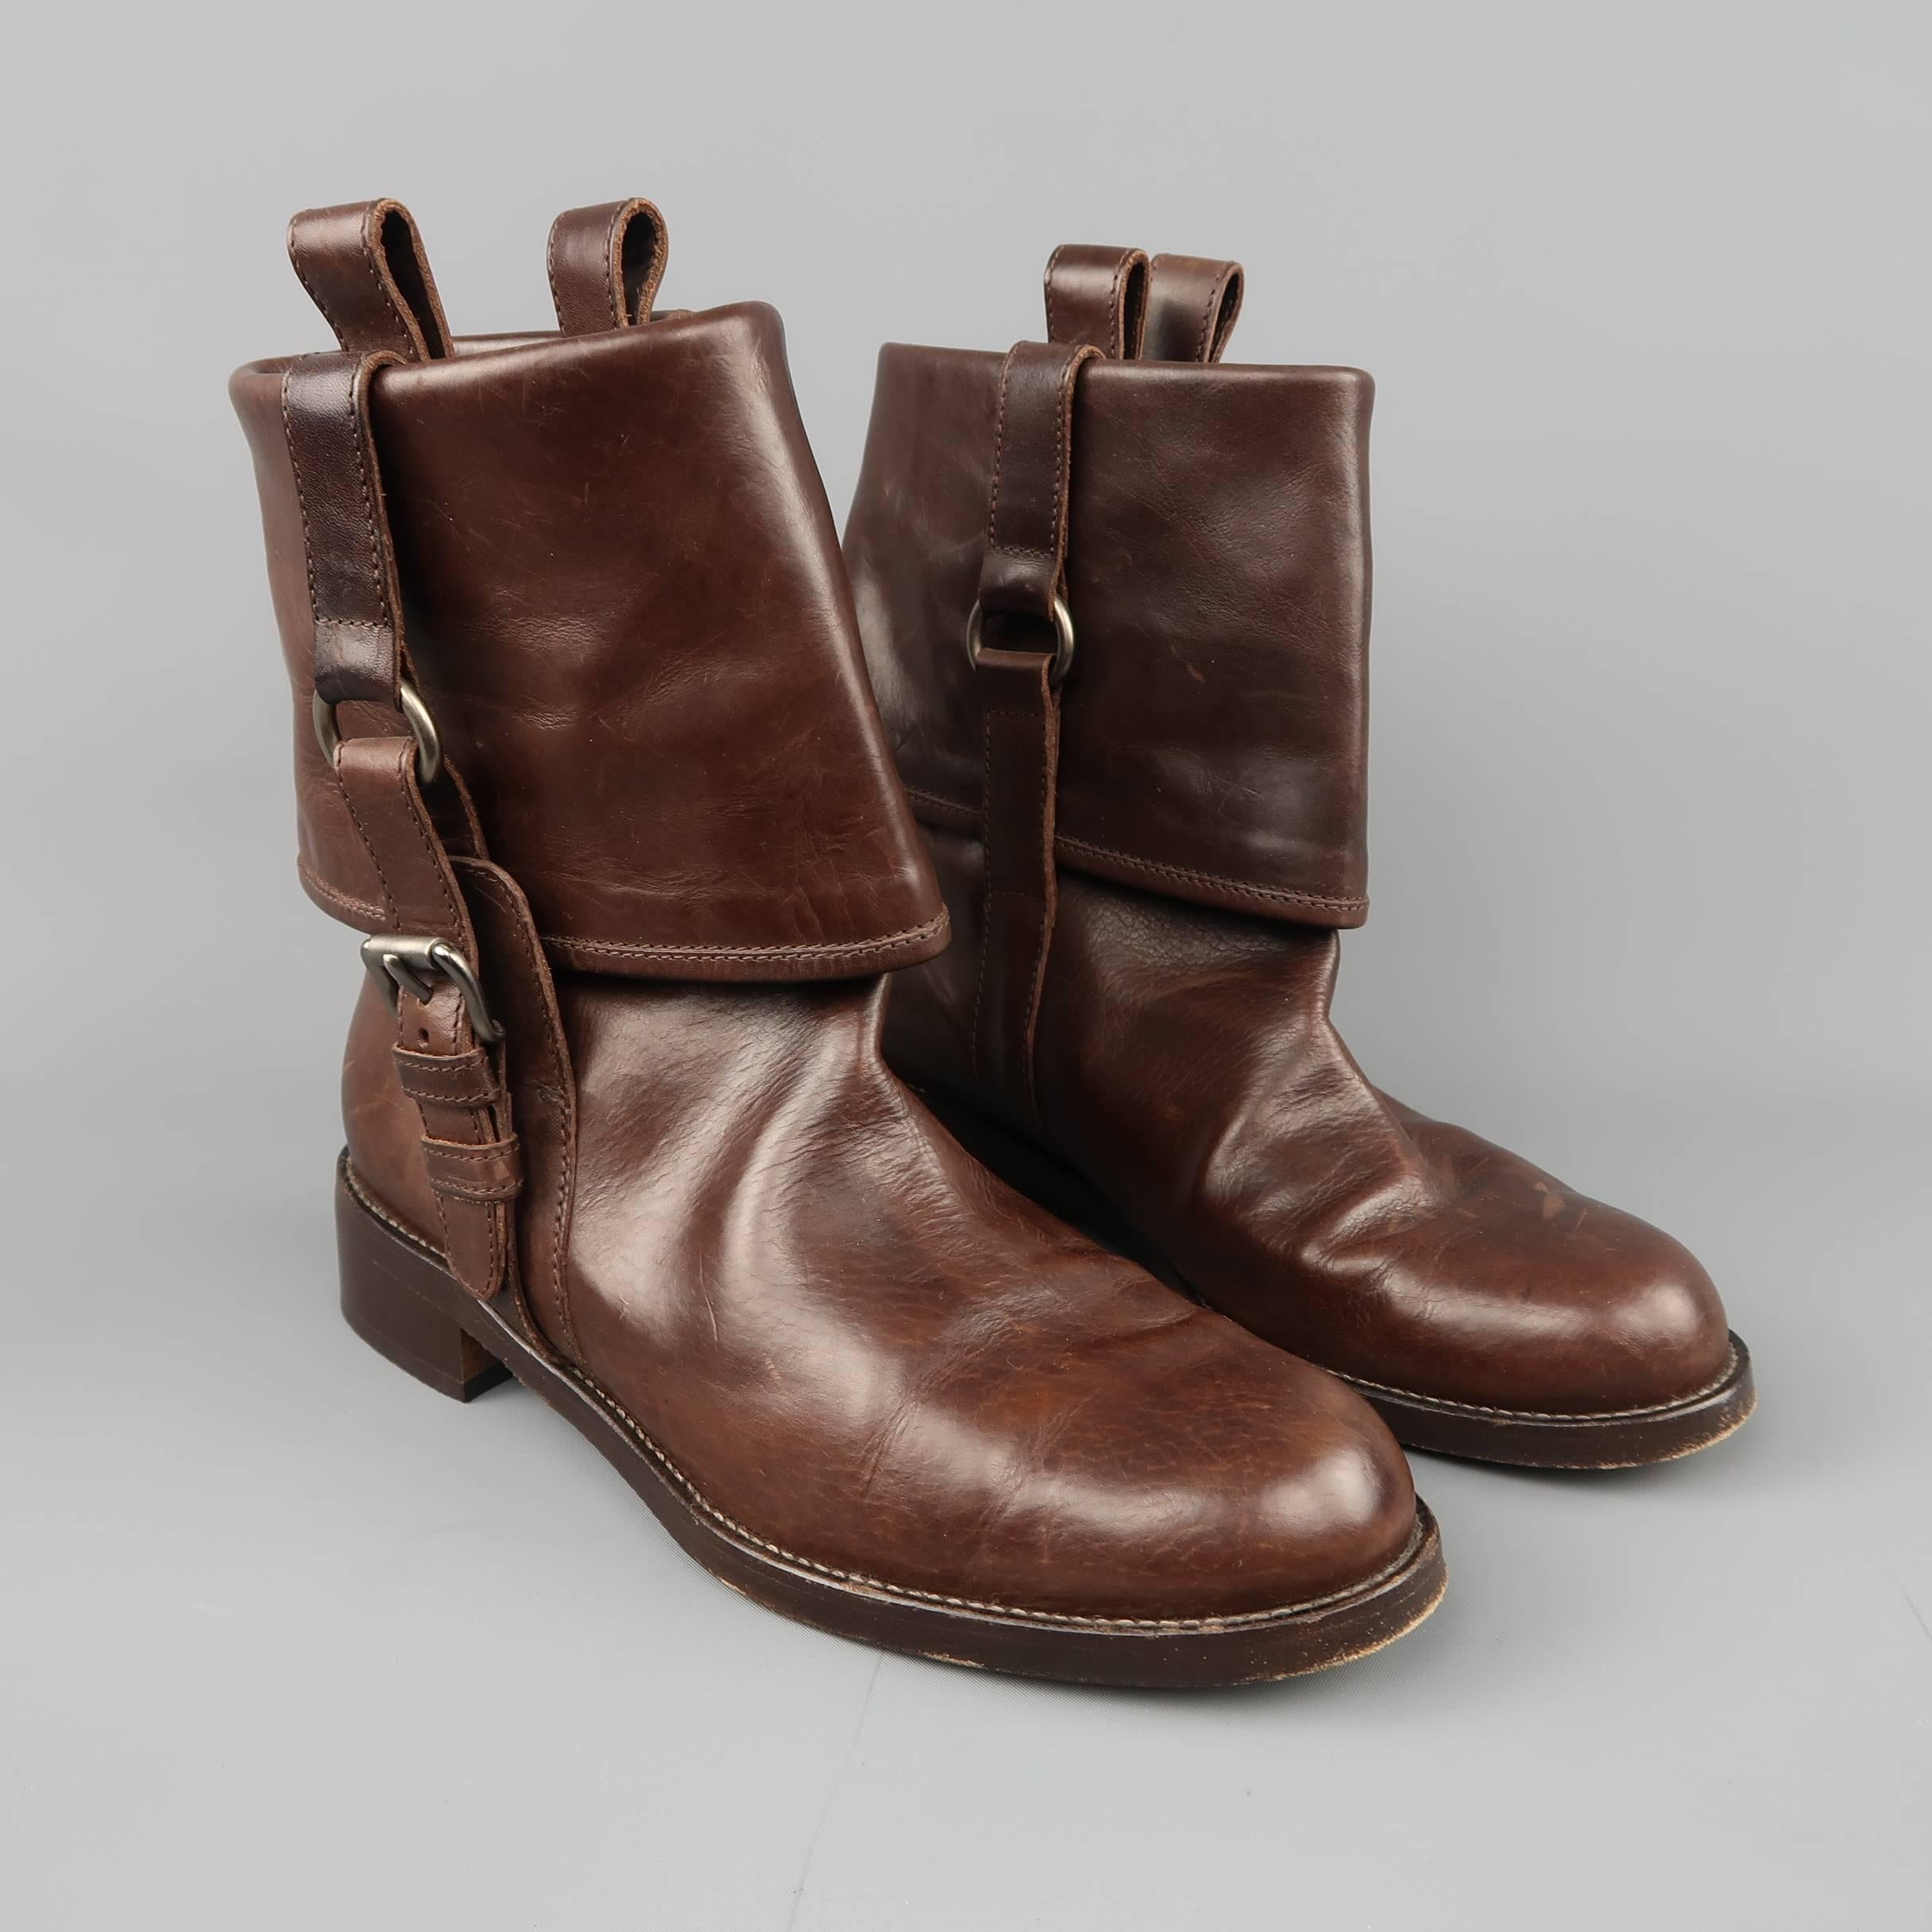 MARNI ankle boots come in brown leather with a rounded toe, low heel, and fold over cuff with harness. Wear throughout. As-is. Made in Italy.
 
Fair Pre-Owned Condition.
Marked: IT 36.5
 
Measurements:
 
Heel: 1 in.
Length: 7 in.